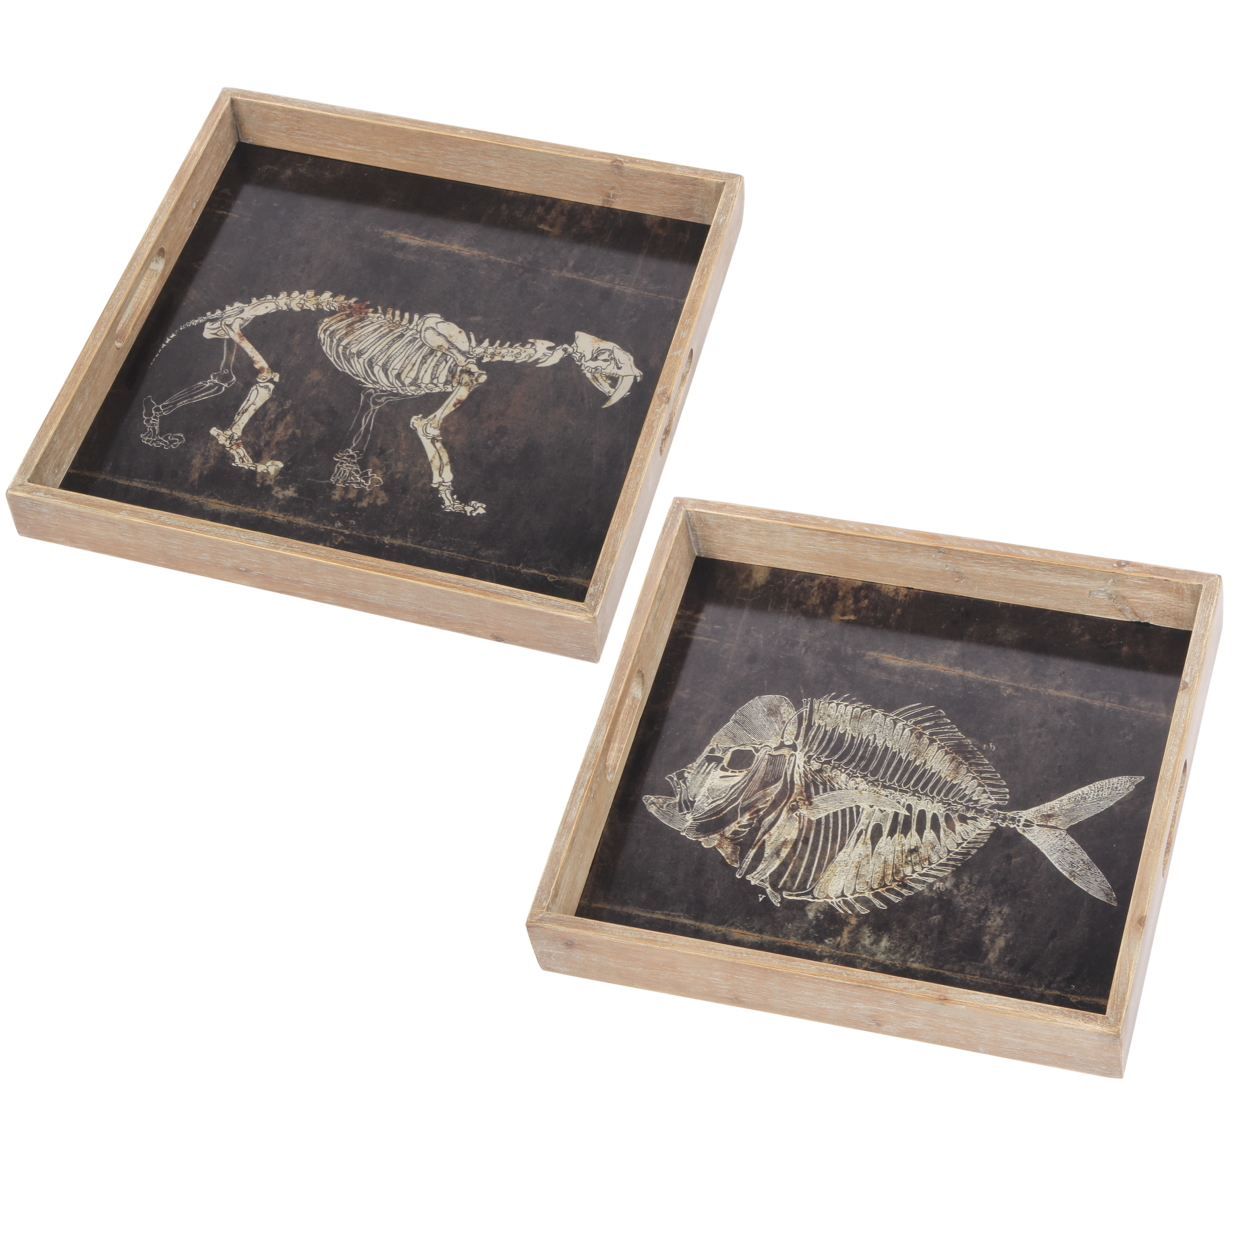 Aluminum Printed Tray With Wooden Framing, Set Of 2, Black And Brown- Saltoro Sherpi